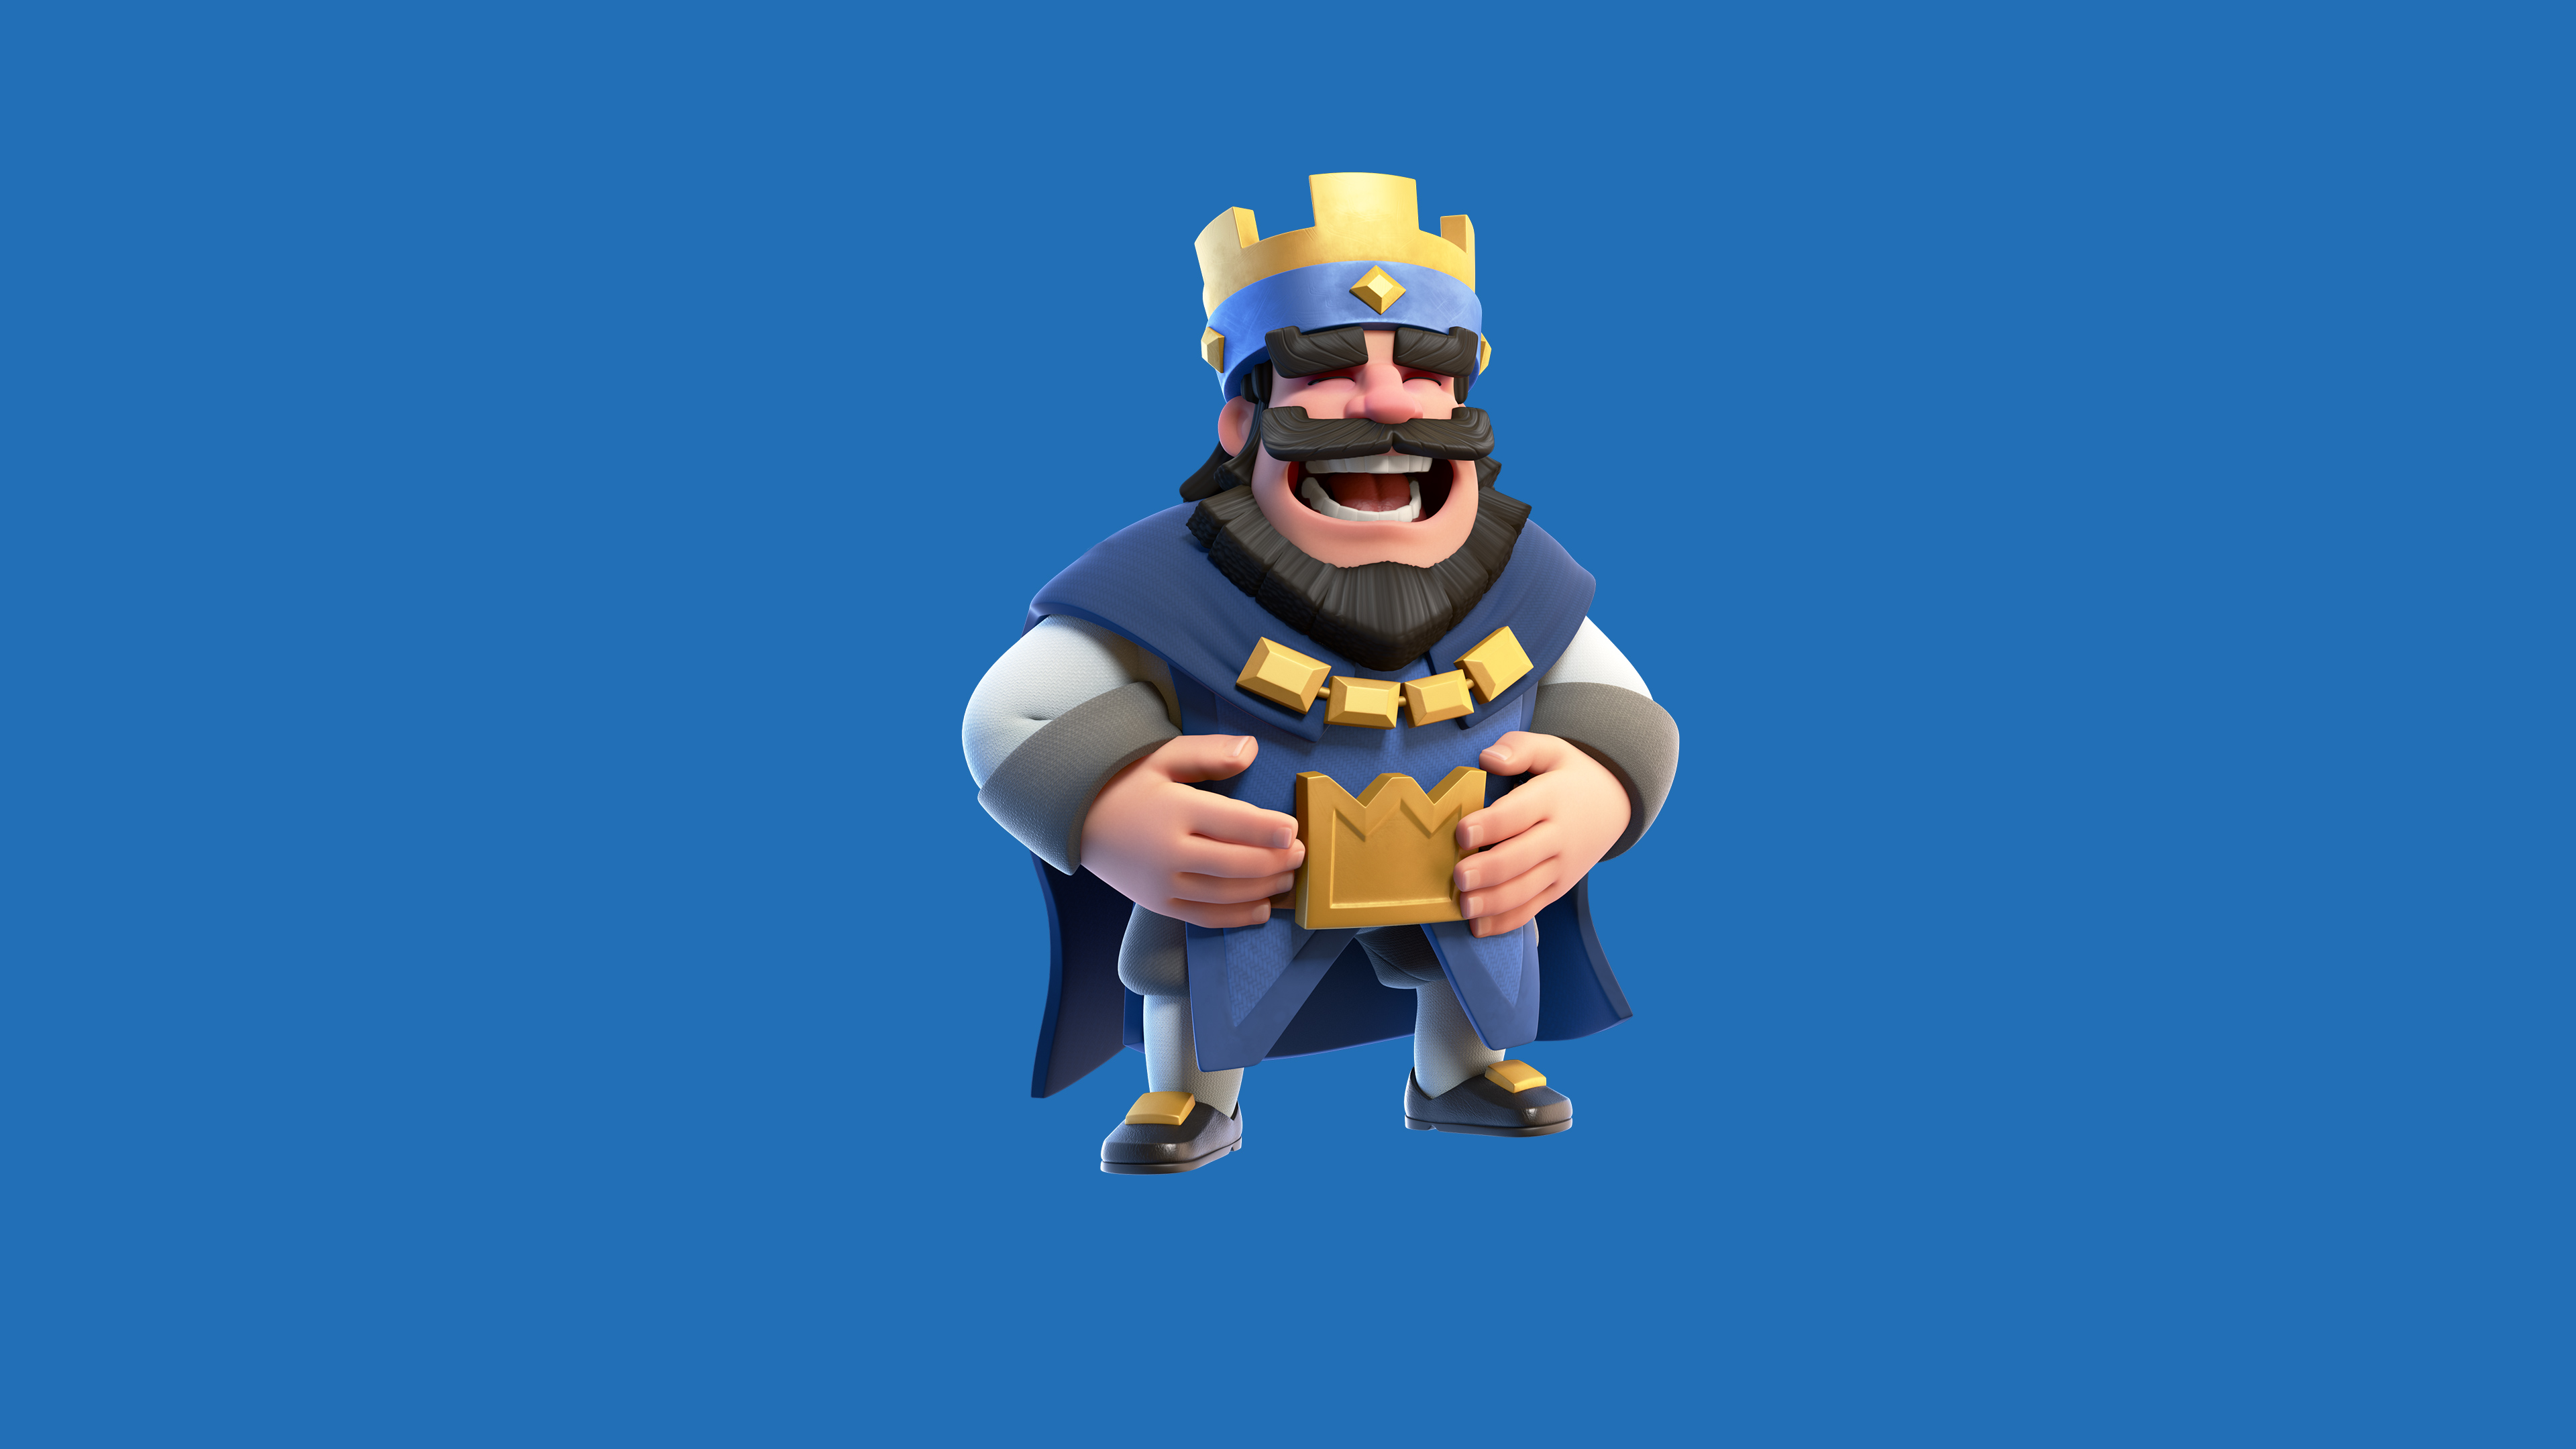 Video Game Clash Royale 3840x2160